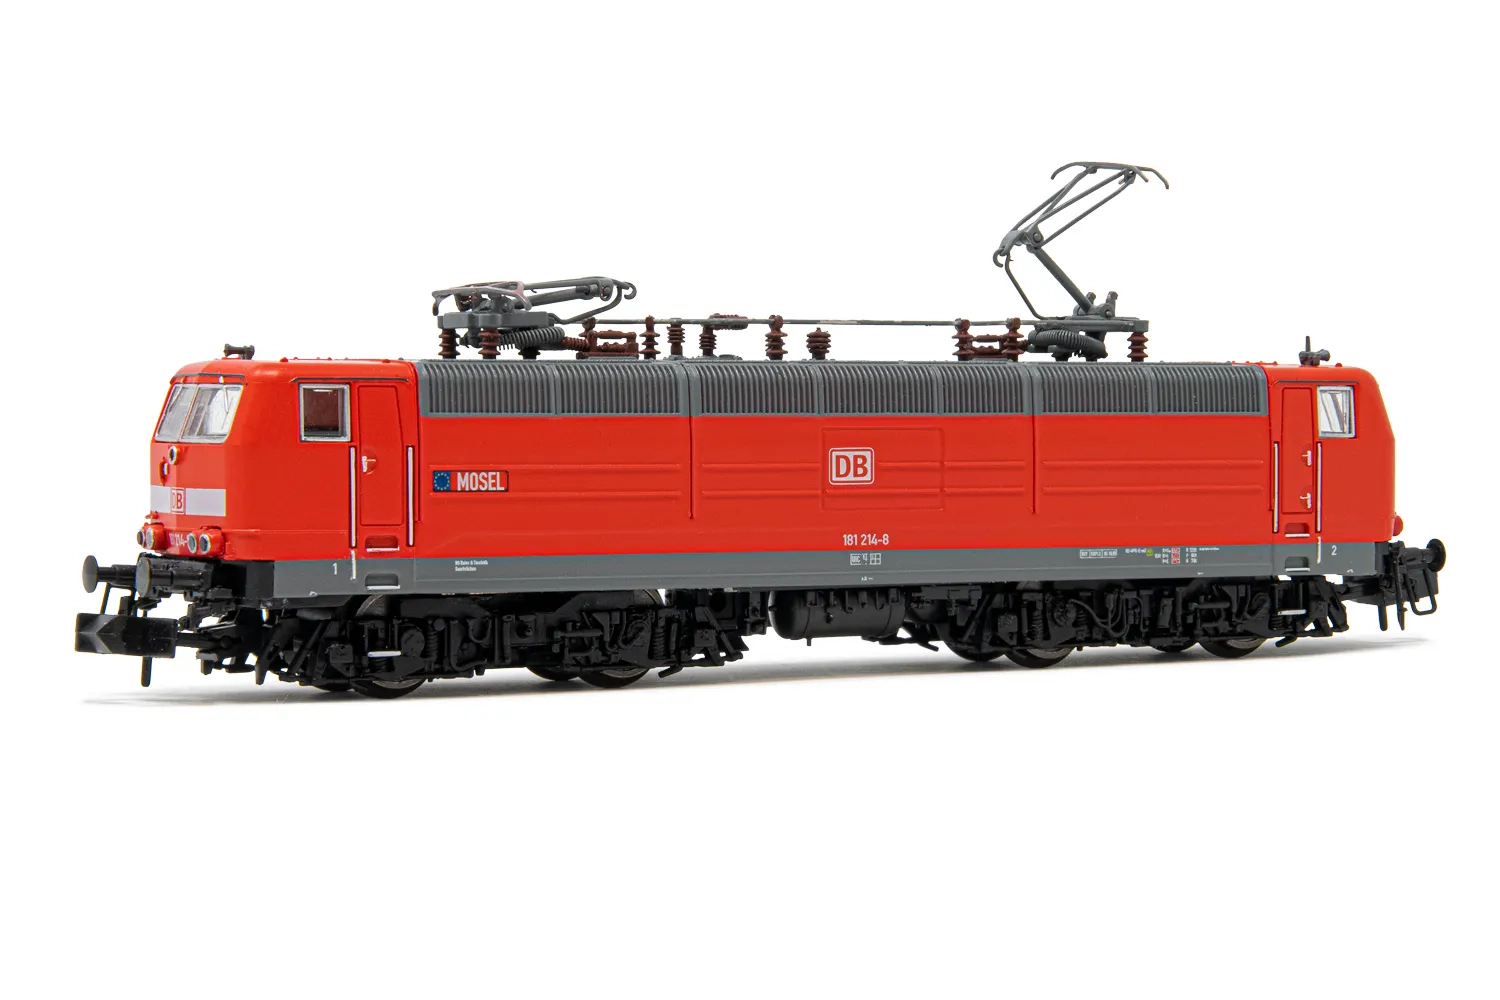 DB AG, electric locomotive class 181.2, traffic red livery, with name "Mosel" period V